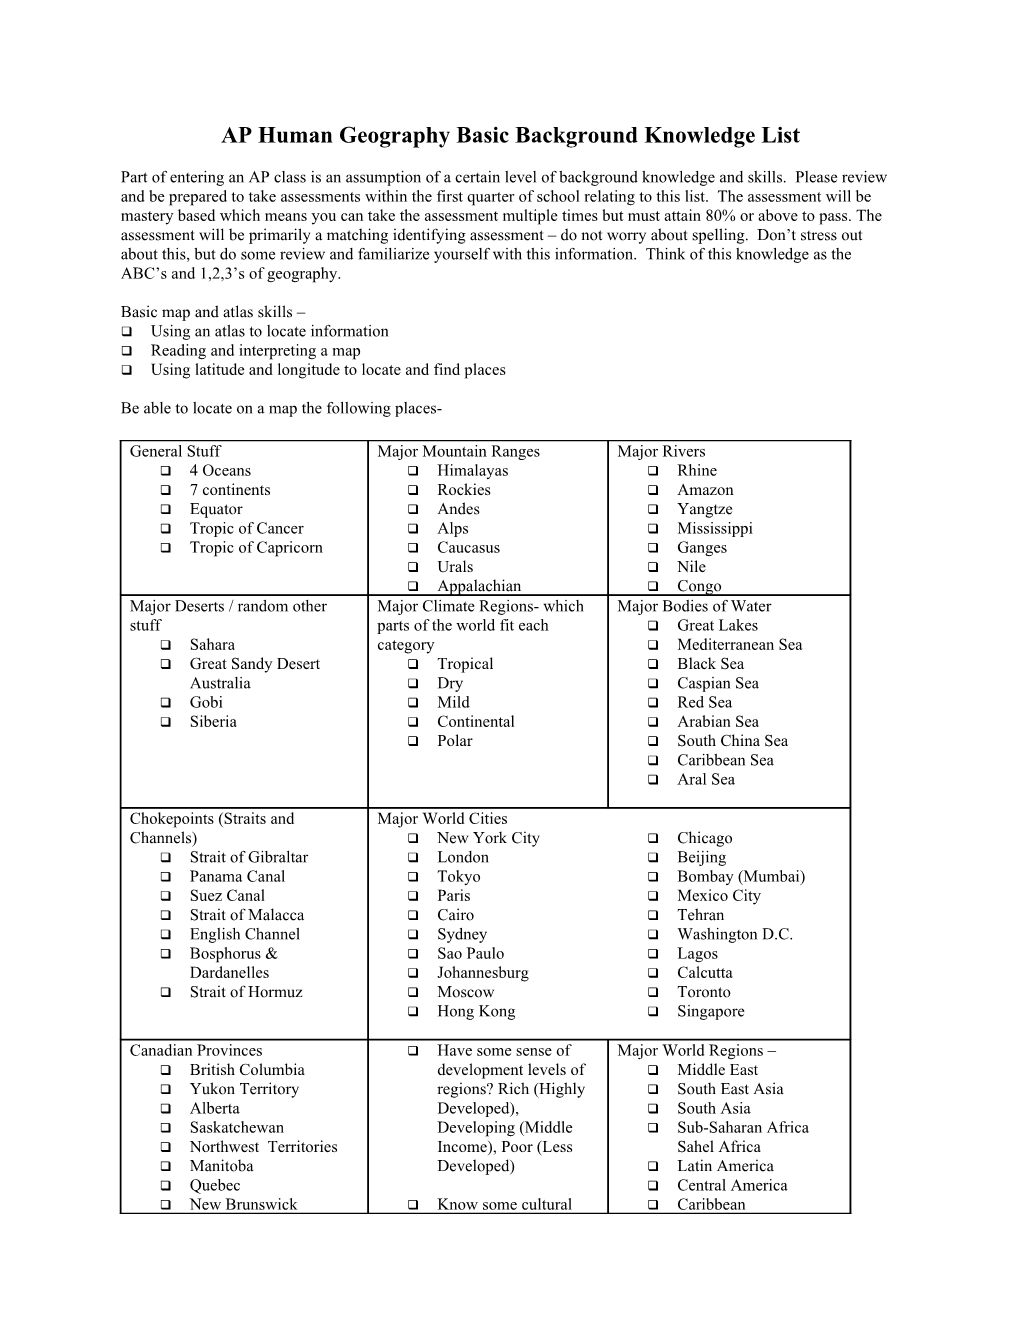 Basic Background Knowledge List and Assessment for All Students Not an in Or out Assessment